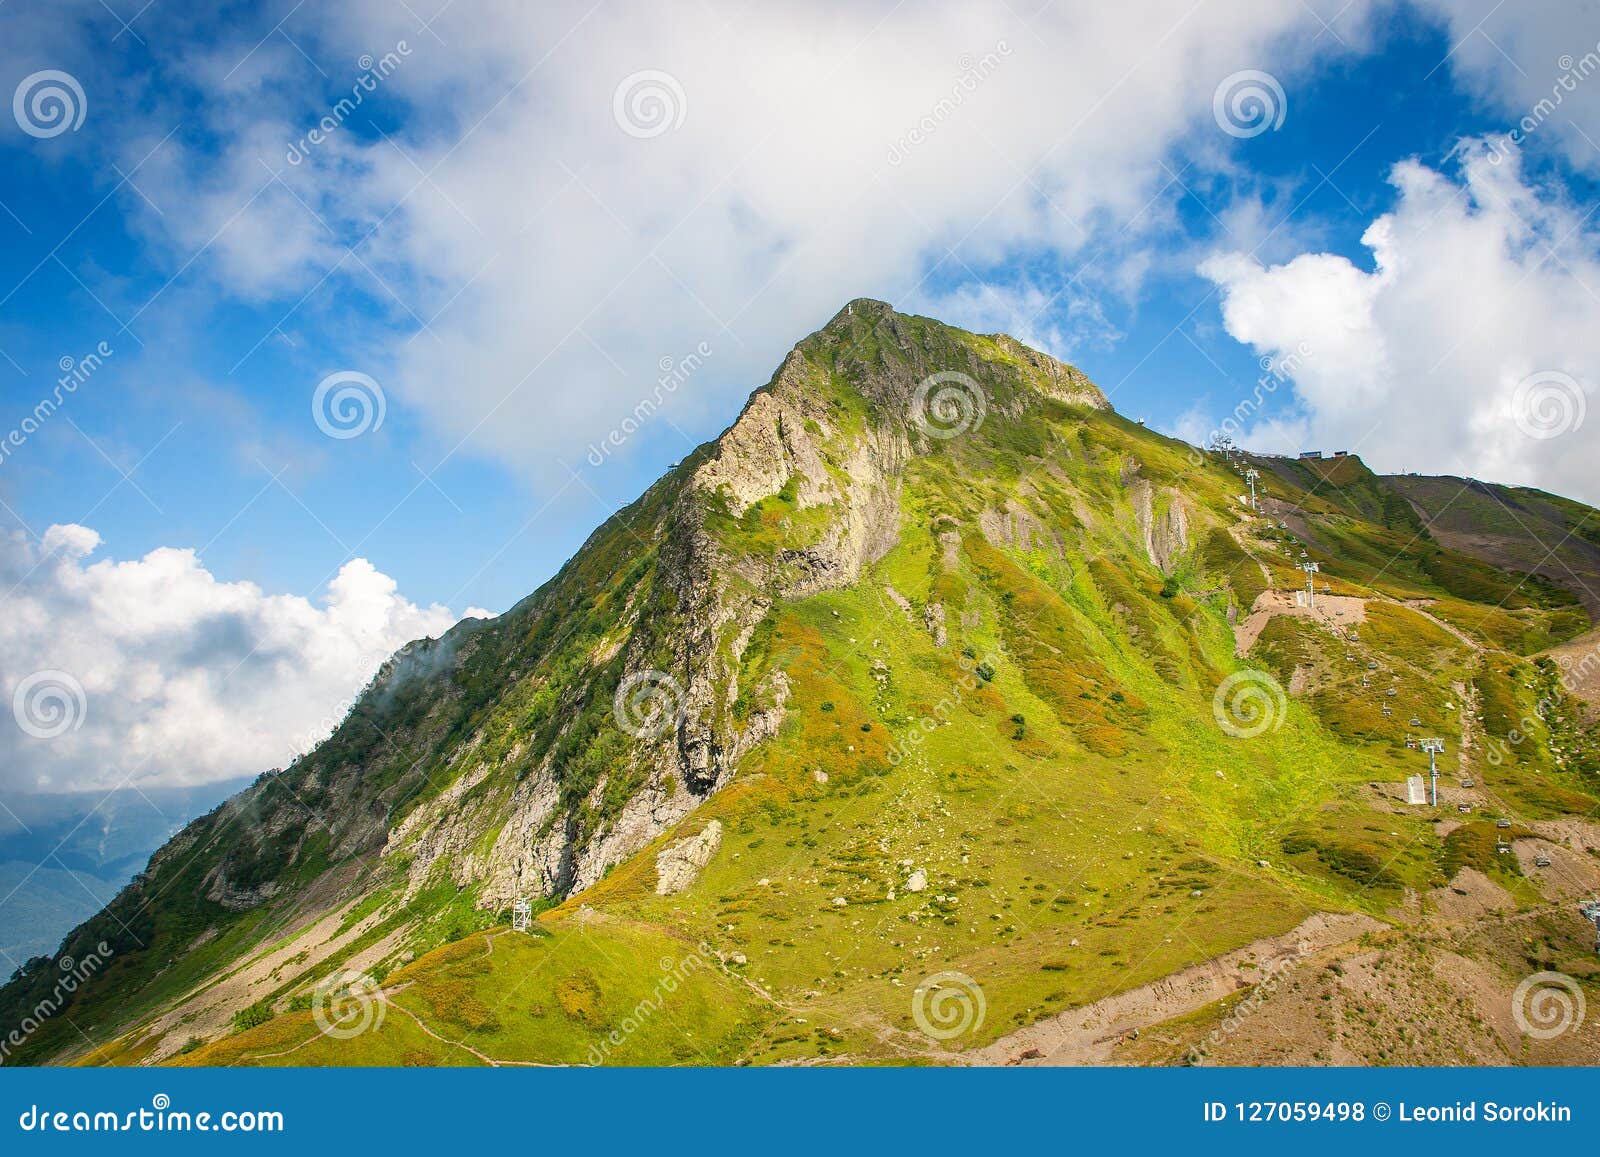 Landscape Of Green Mountain Peak In Summer Stock Photo Image Of